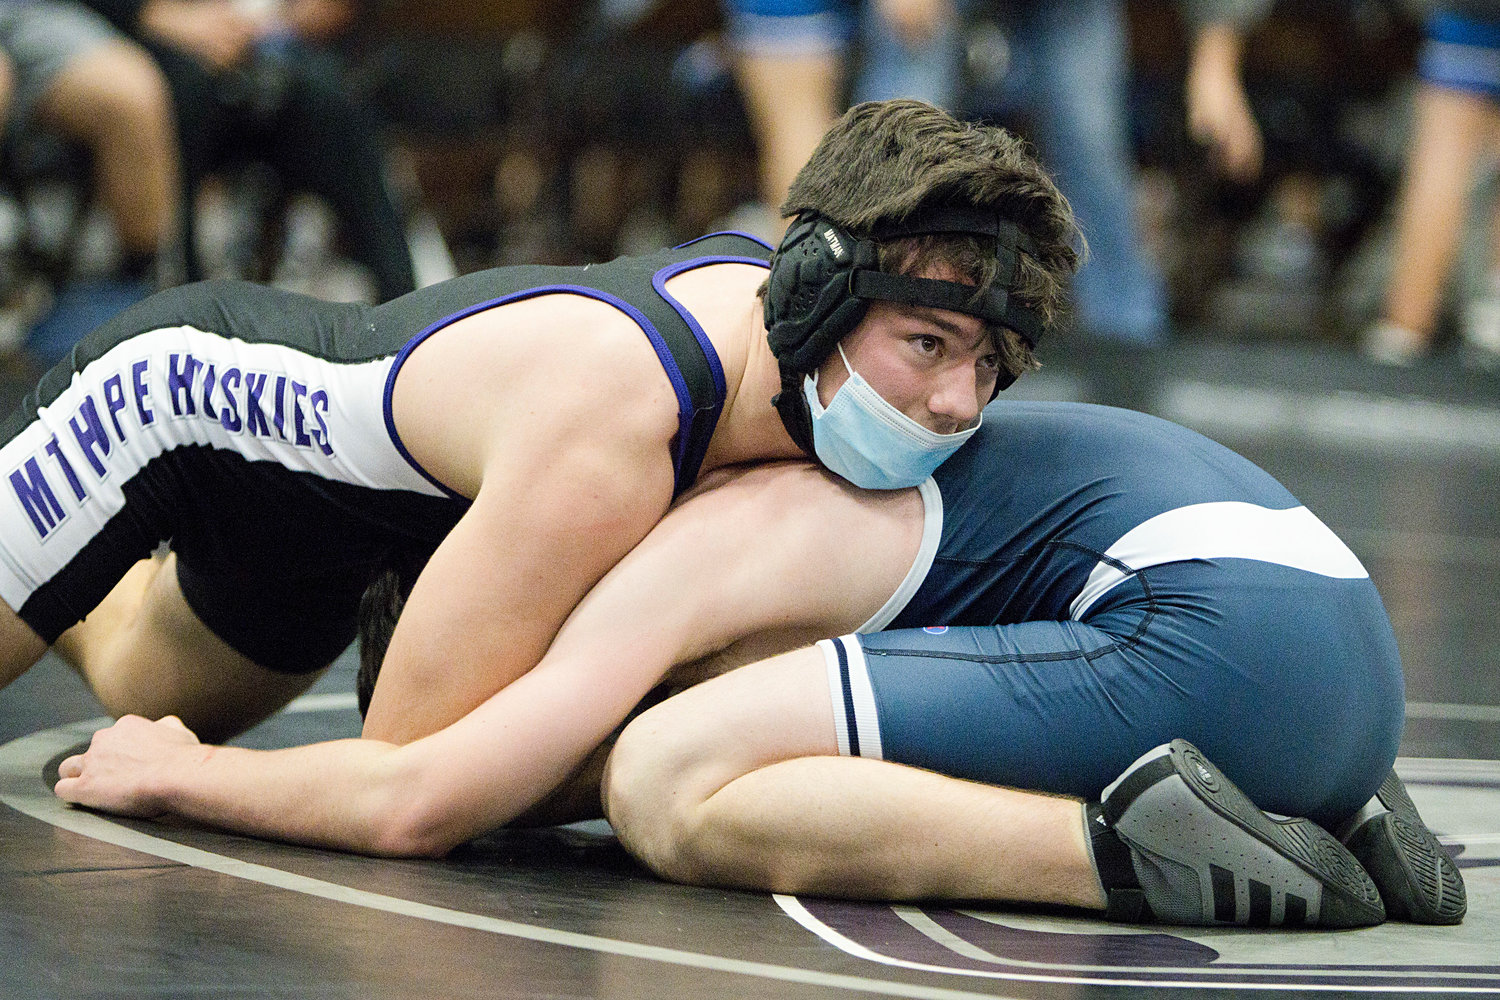 Riley Howland eyes the clock while controlling his Needham opponent
in the 138 lb. weight class, Saturday.